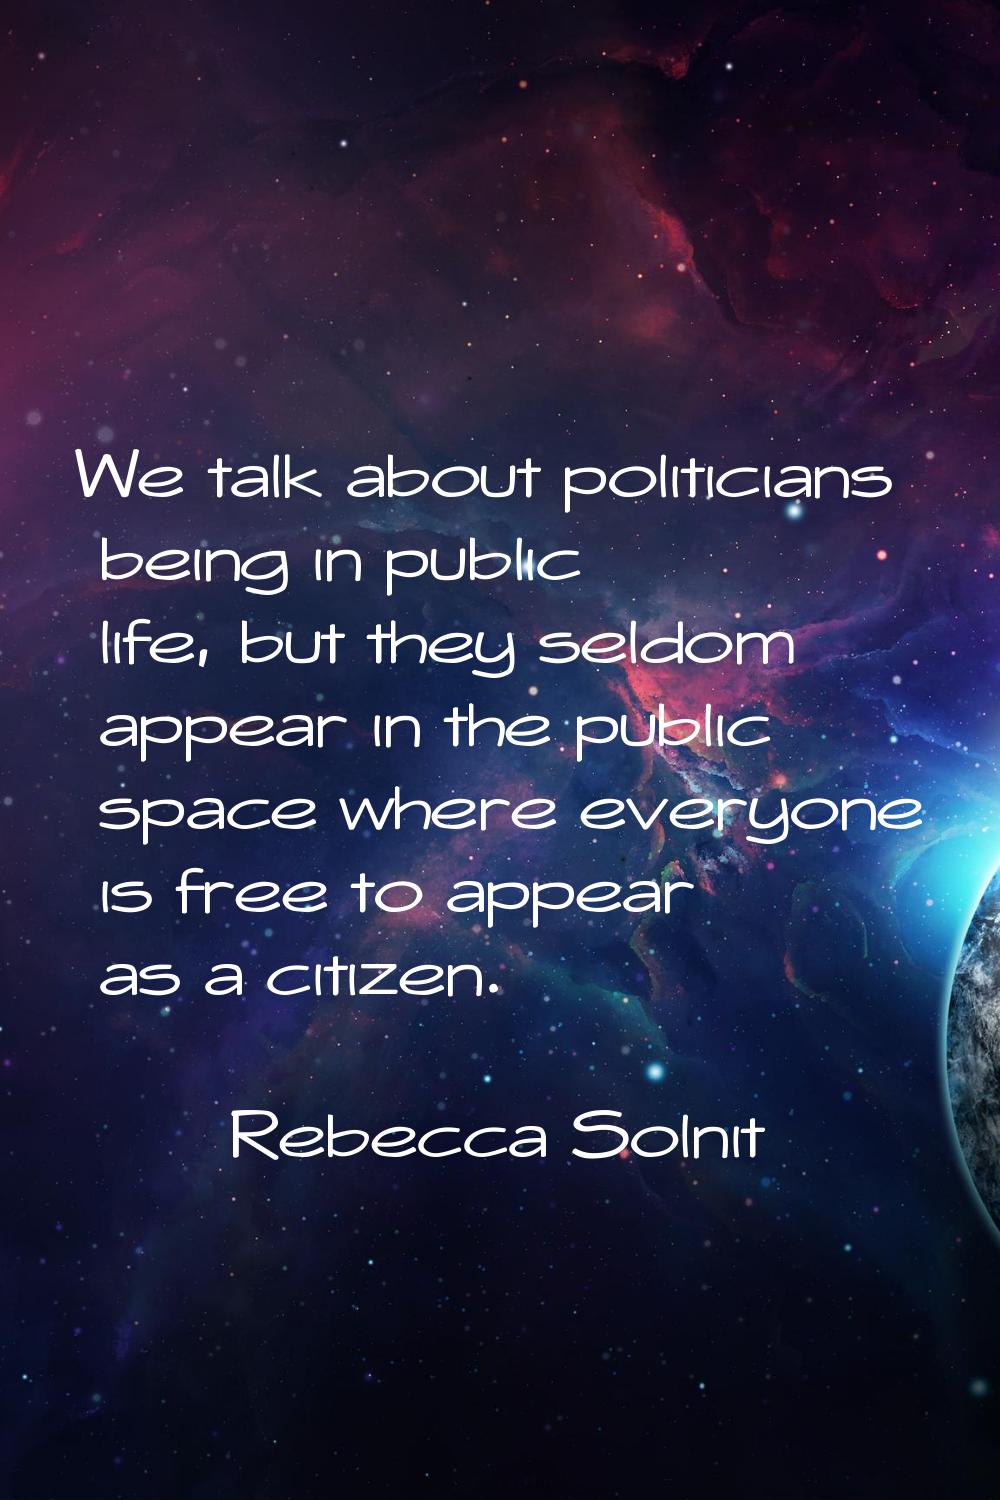 We talk about politicians being in public life, but they seldom appear in the public space where ev